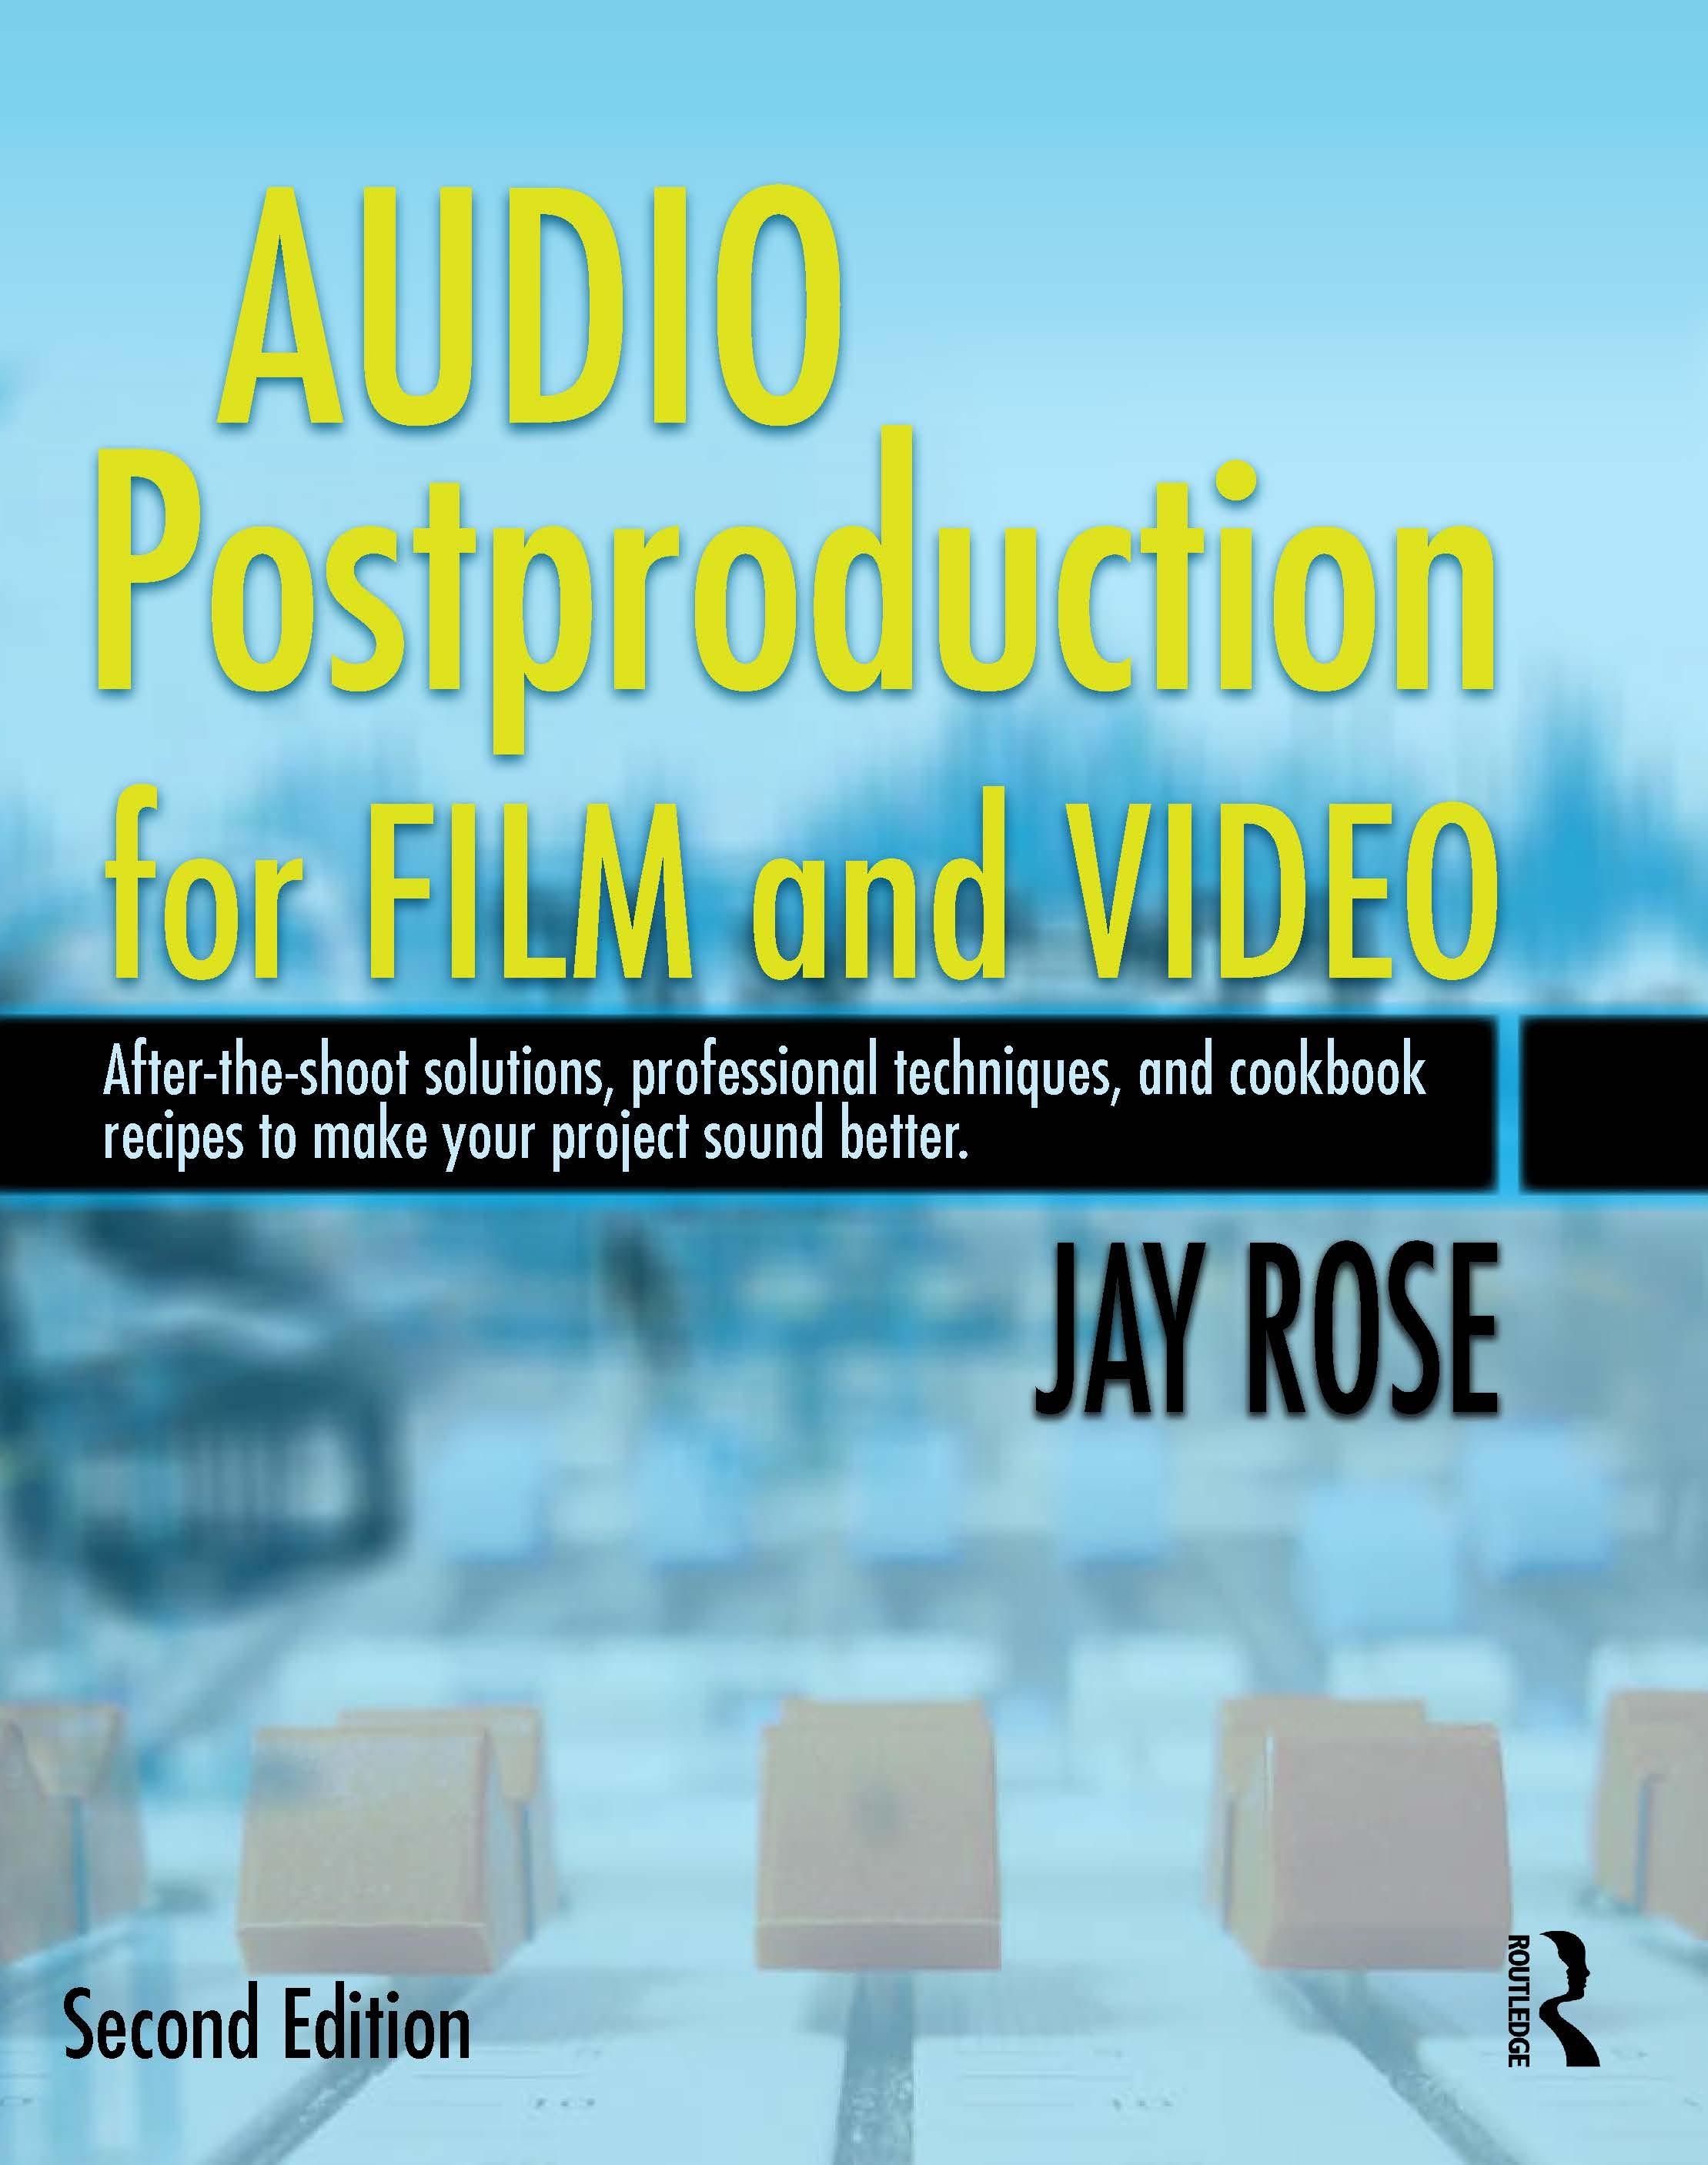 Audio Postproduction for Film and Video: After-The-Shoot Solutions, Professional Techniques, and Cookbook Recipes to Make Your Project Sound Better [W